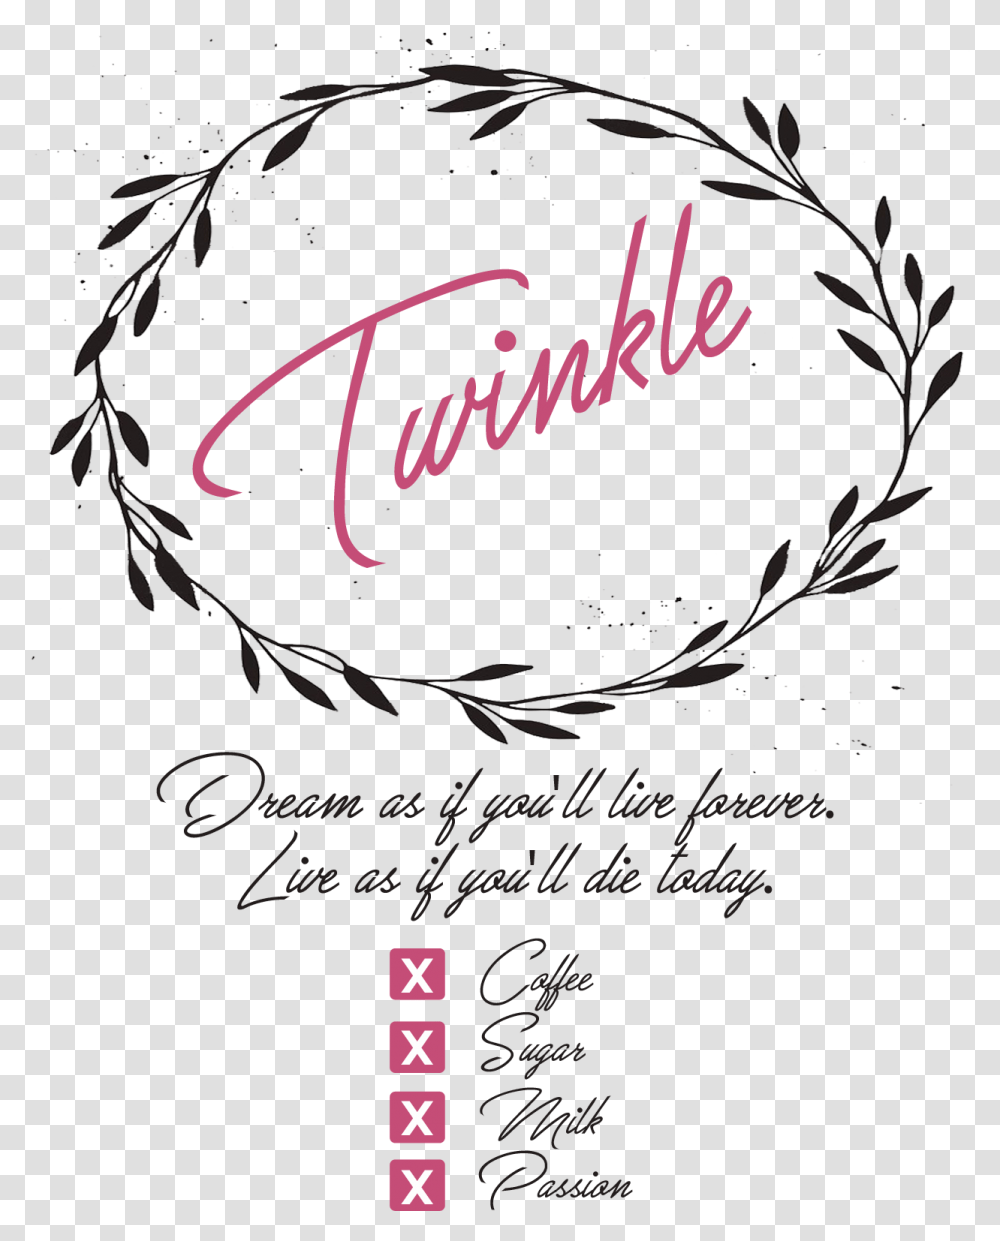 Twinkle Download Illustration, Calligraphy, Handwriting, Paper Transparent Png